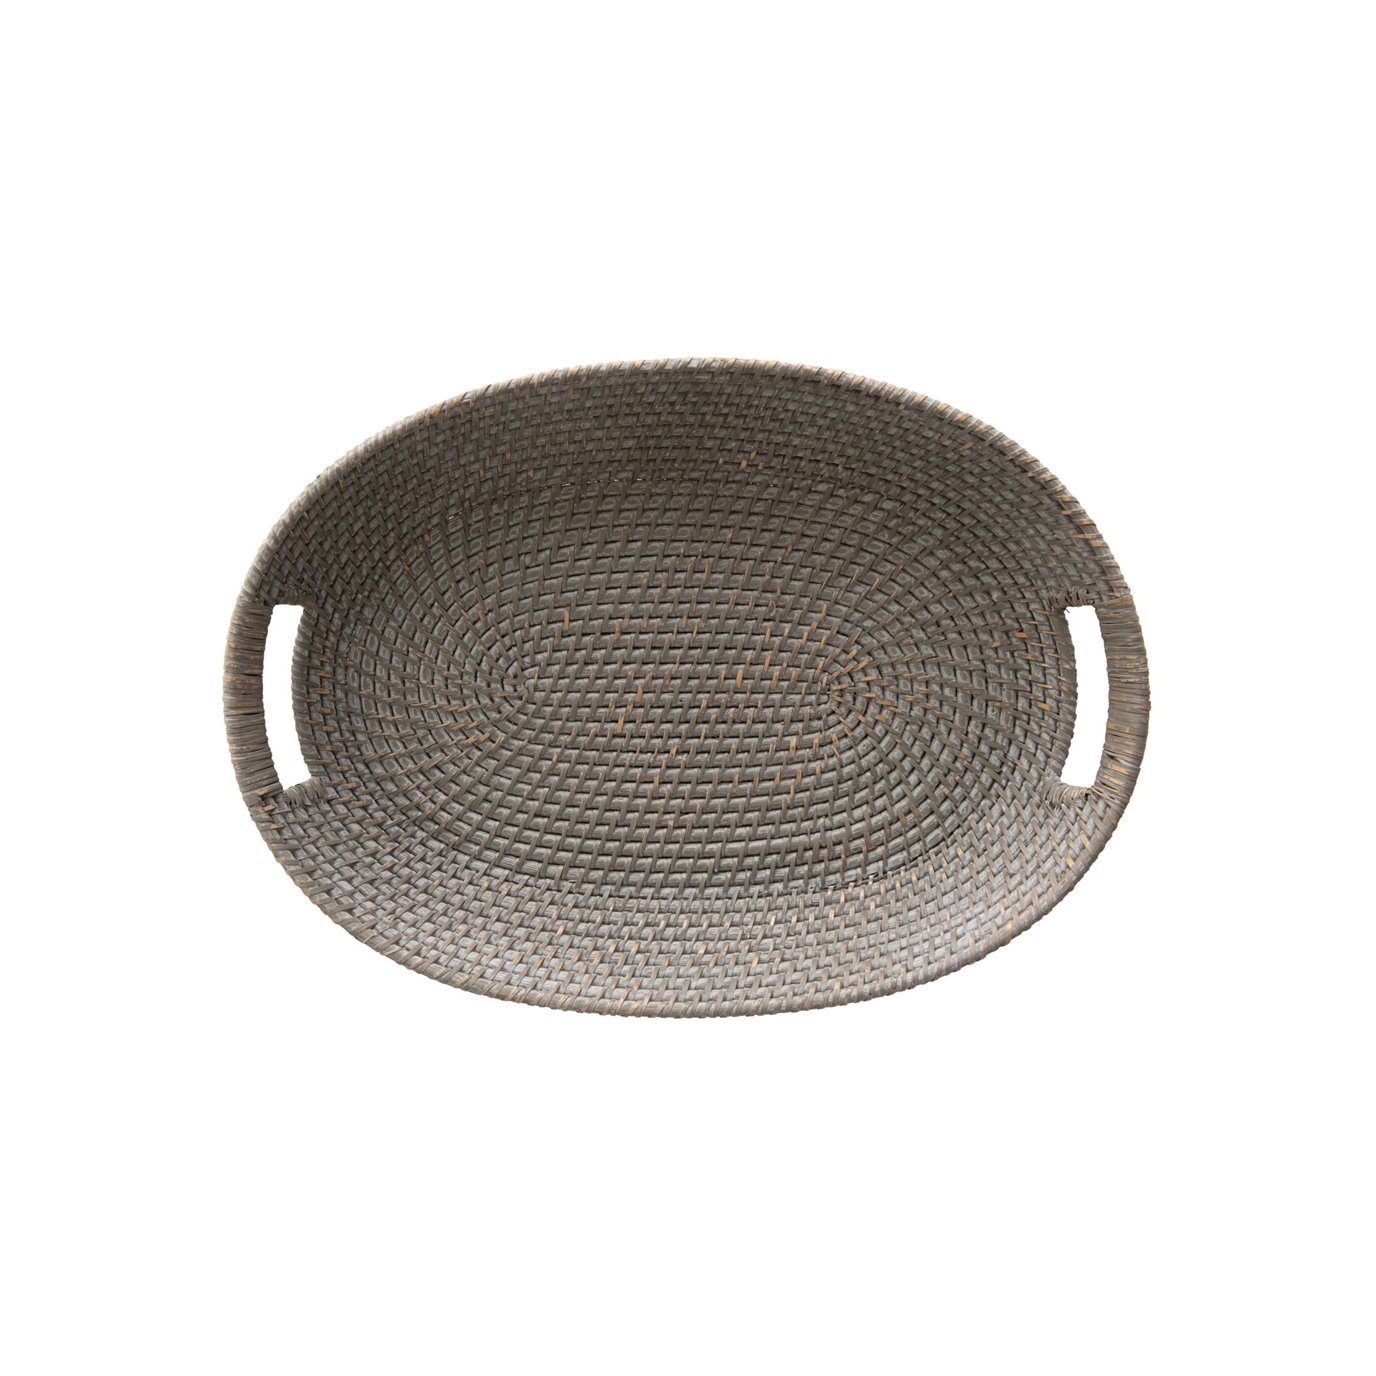 Decorative Hand-Woven Rattan and Palm Gray Wash Tray with Handles